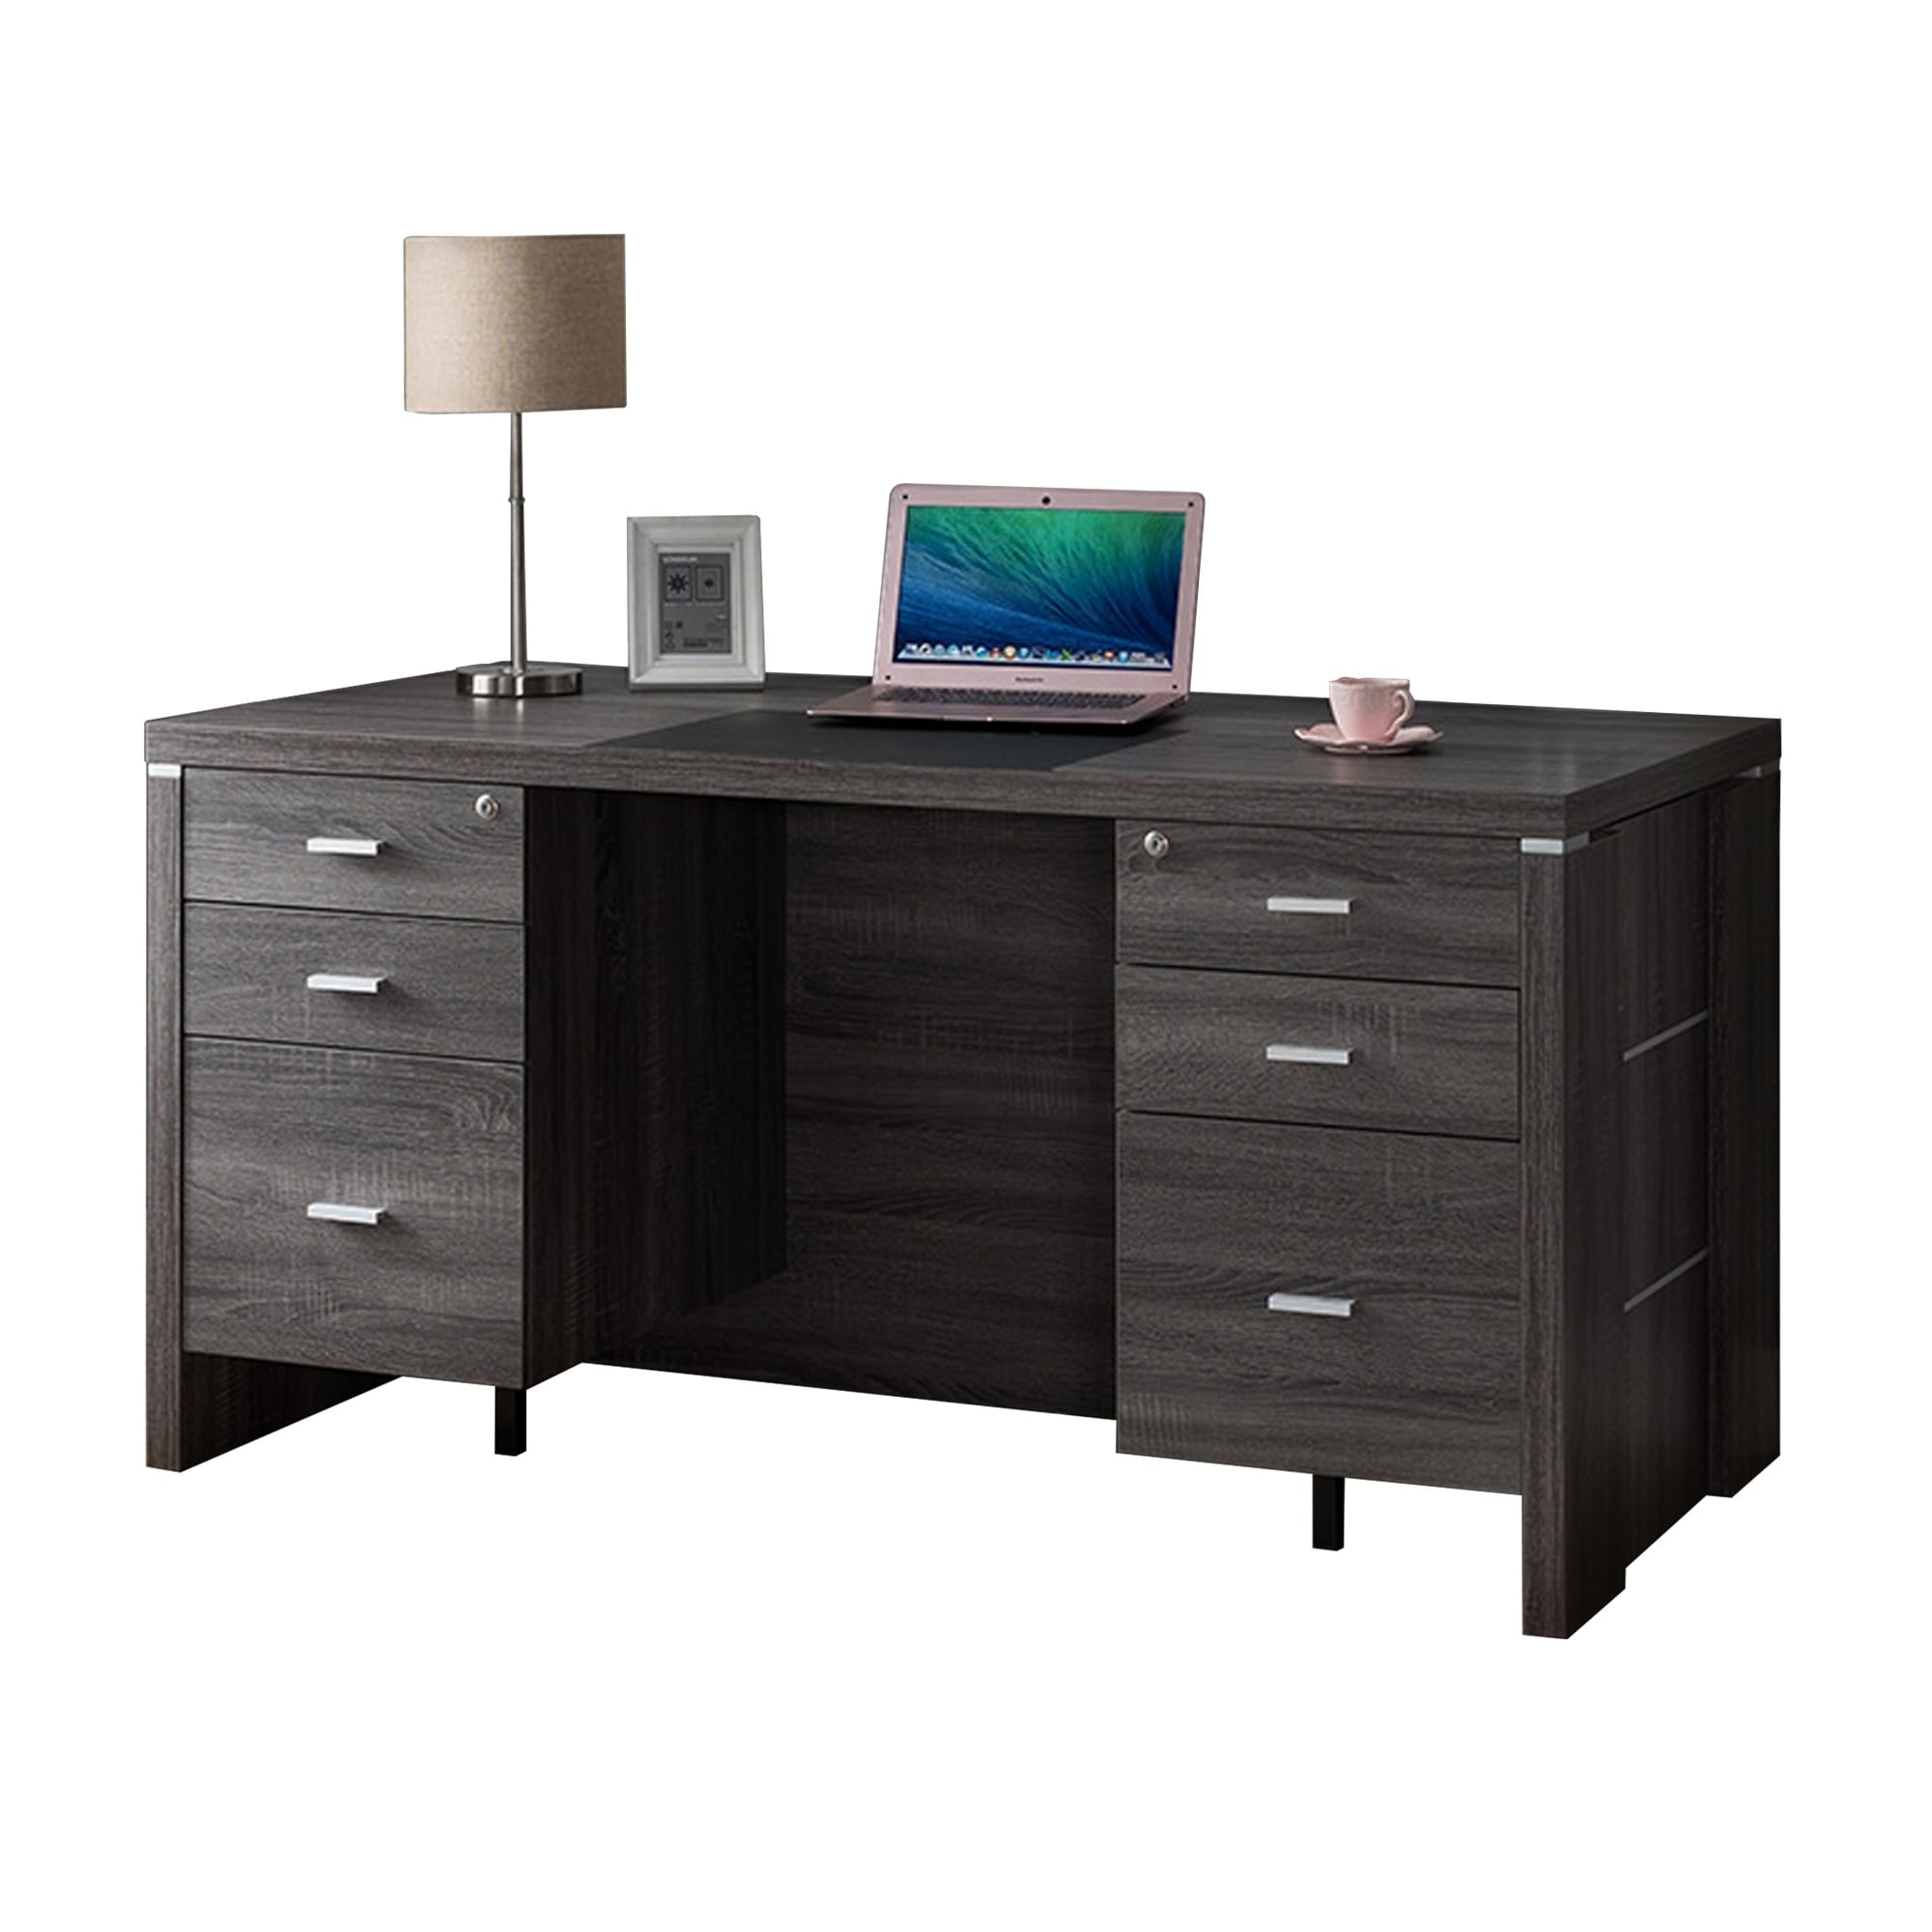 Shop Rectangular Space Efficient Wooden Desk With Two Locking